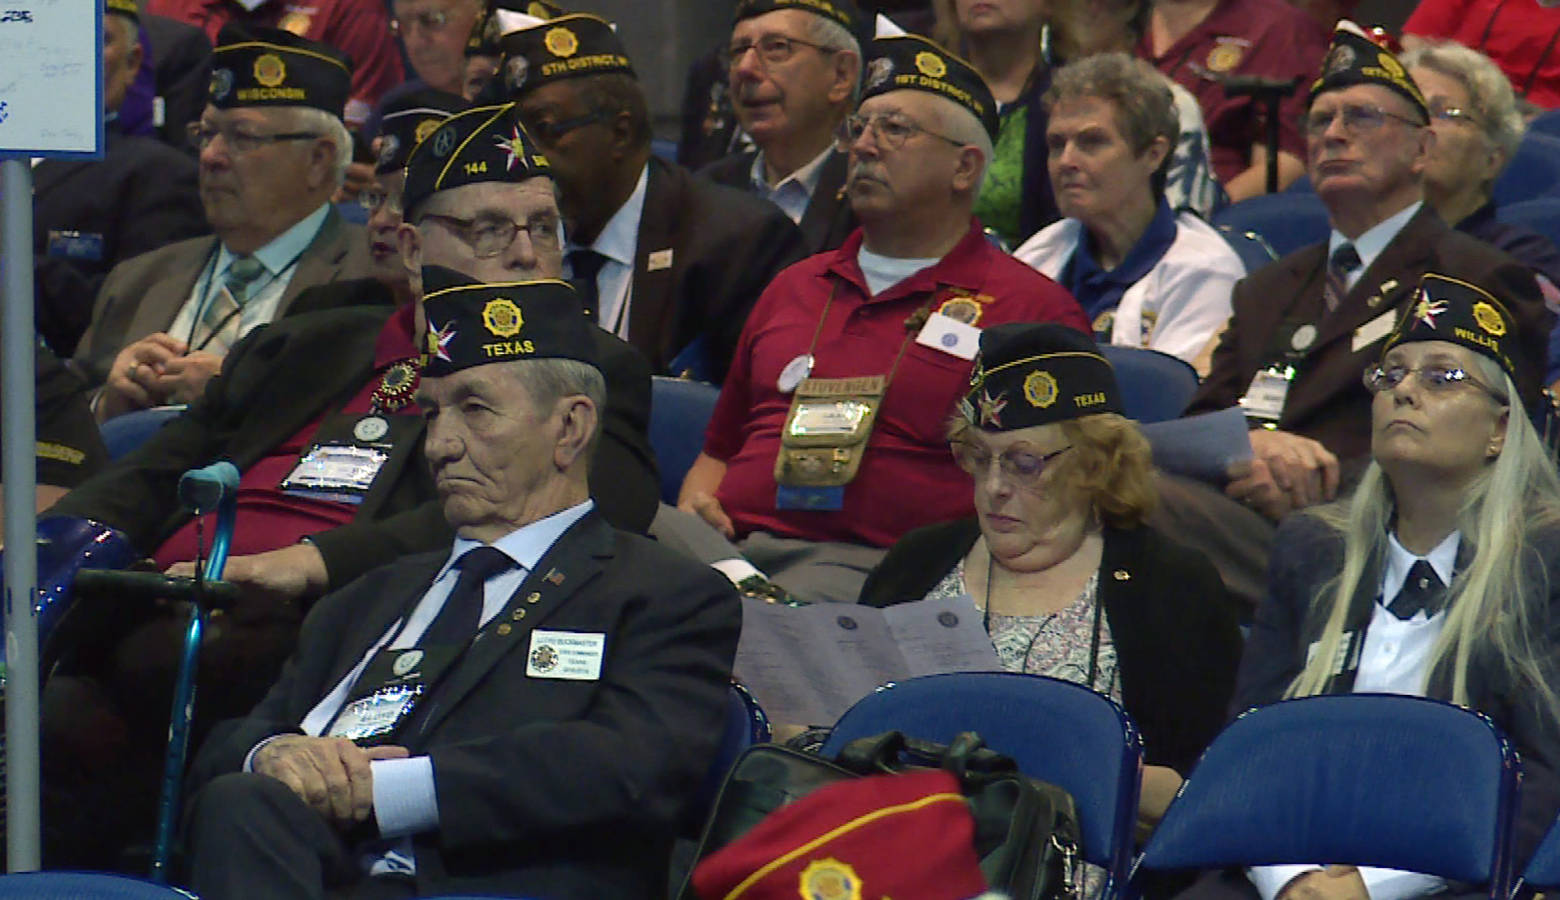 Attendees at the American Legion national convention in Indianapolis. (Lauren Chapman/IPB News)